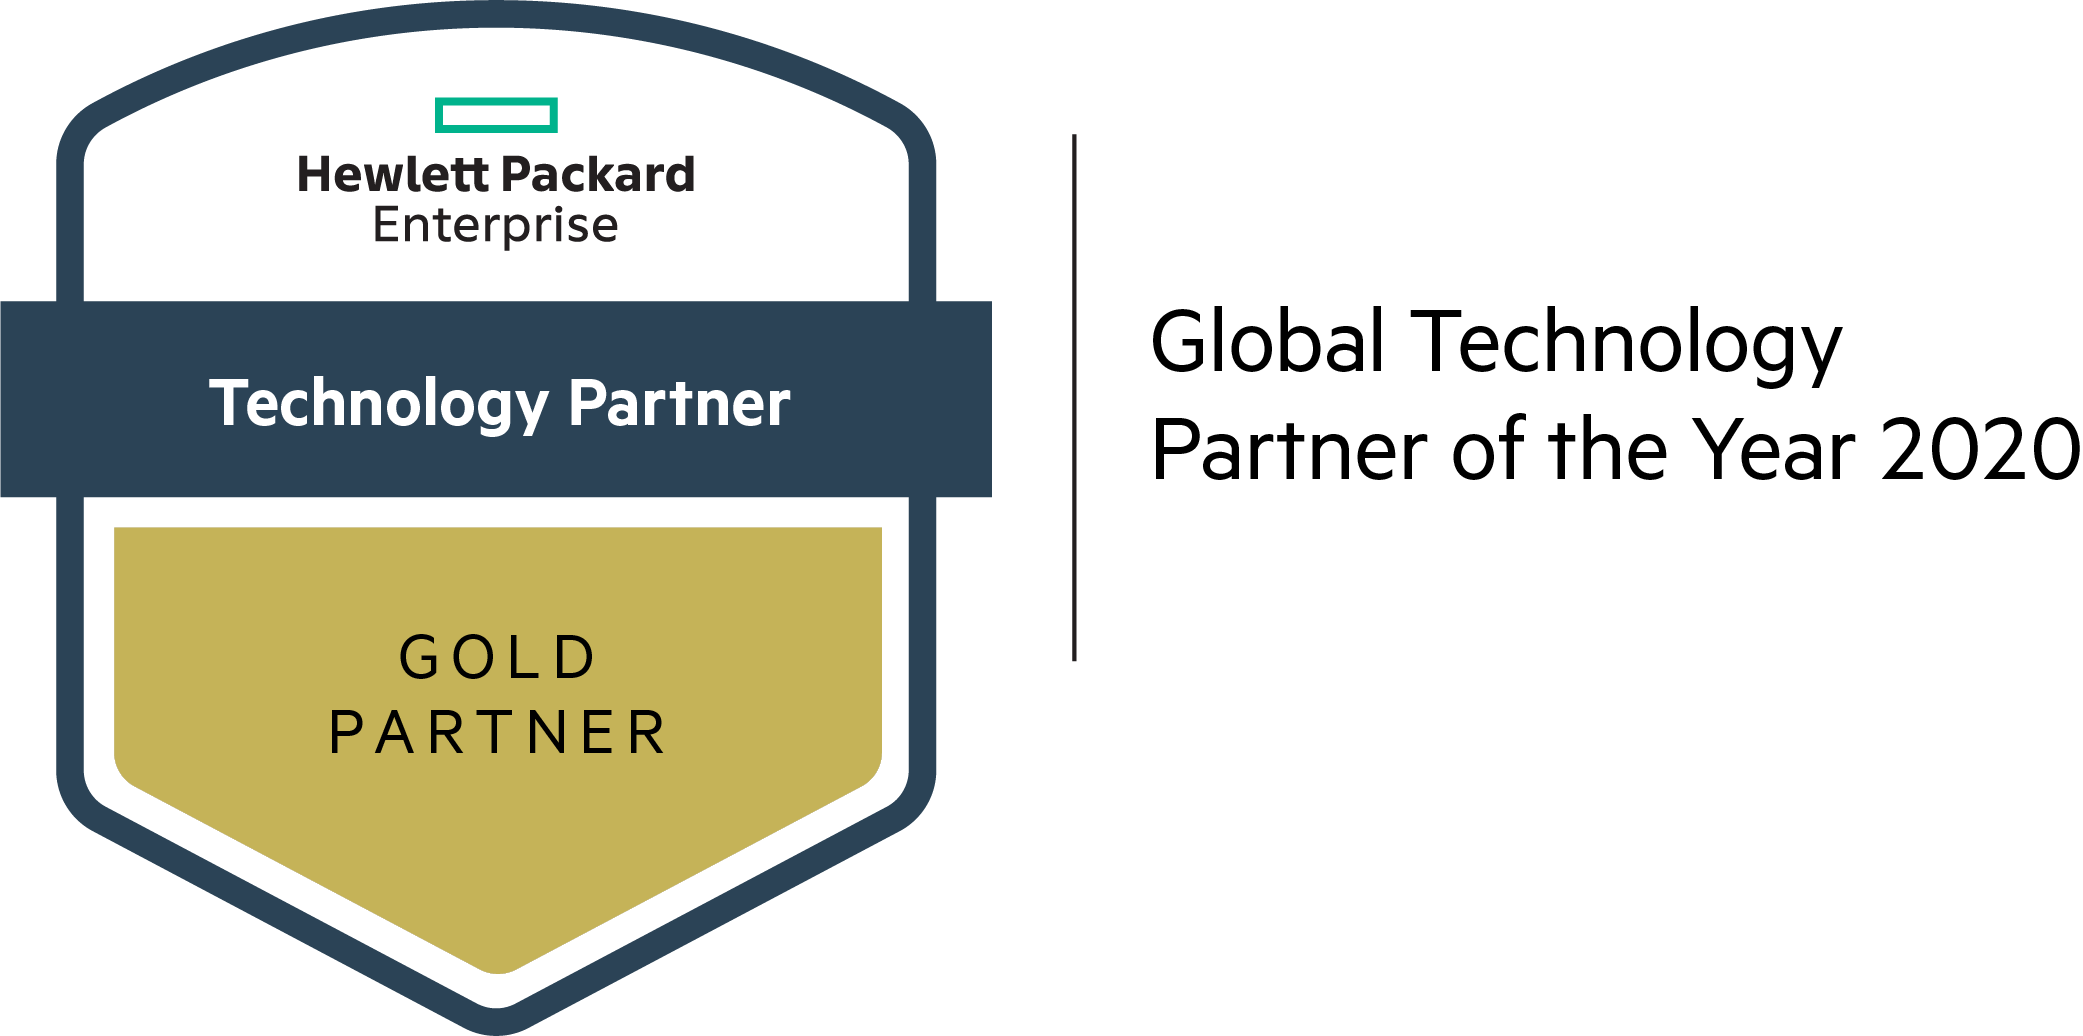 Veeam Wins HPE 2020 Global Technology Partner of the Year Award  for the Second Consecutive Year